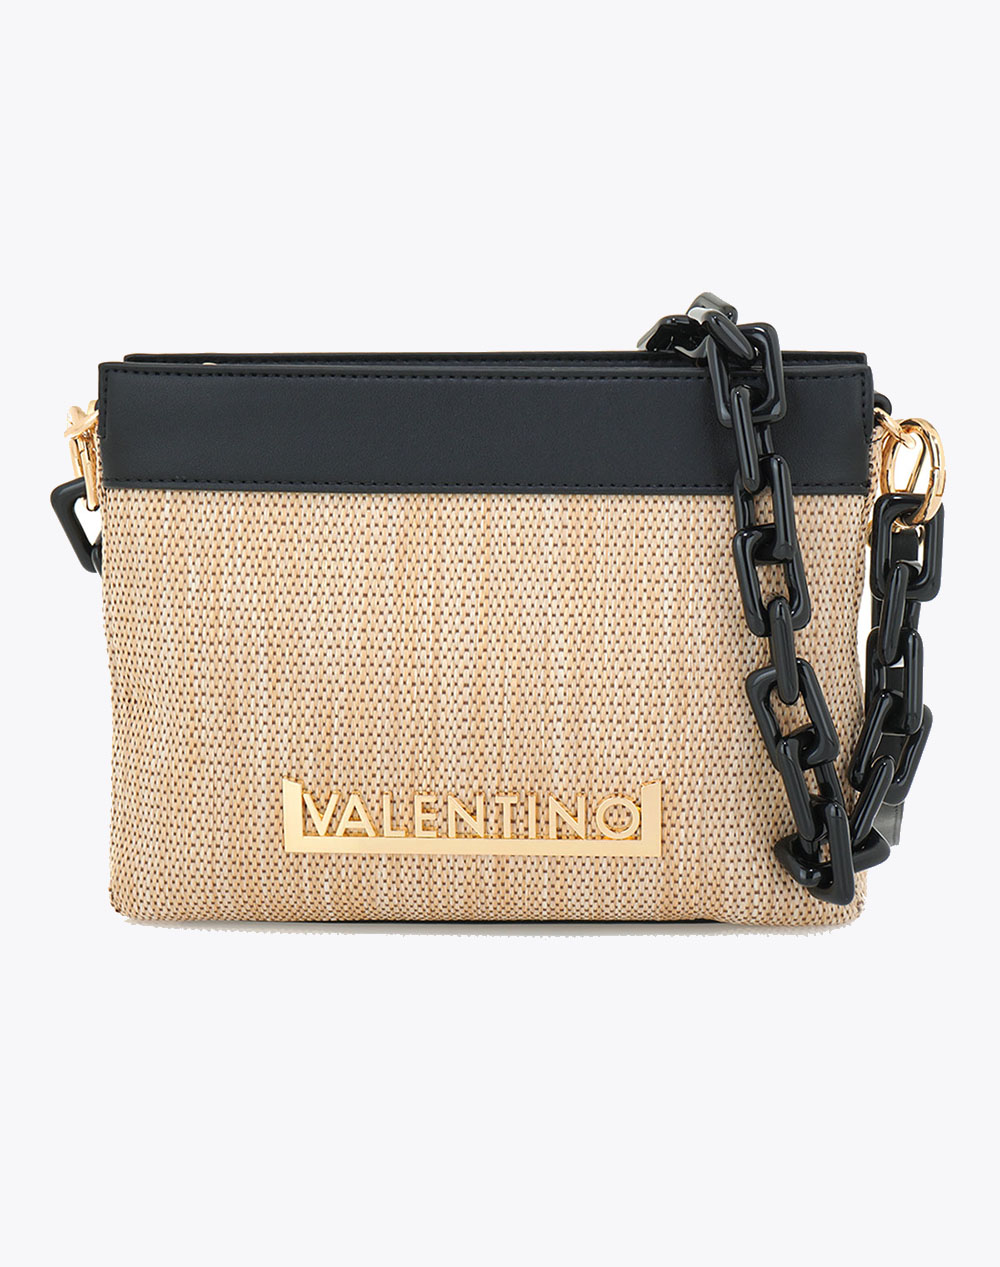 VALENTINO BAGS ΤΣΑΝΤΕΣ ΤΑΧΥΔΡΟΜΟΥ /CROSS BODY (Διαστάσεις: 25 x 19 x 4 εκ.) S61680419H25-H25 Biege